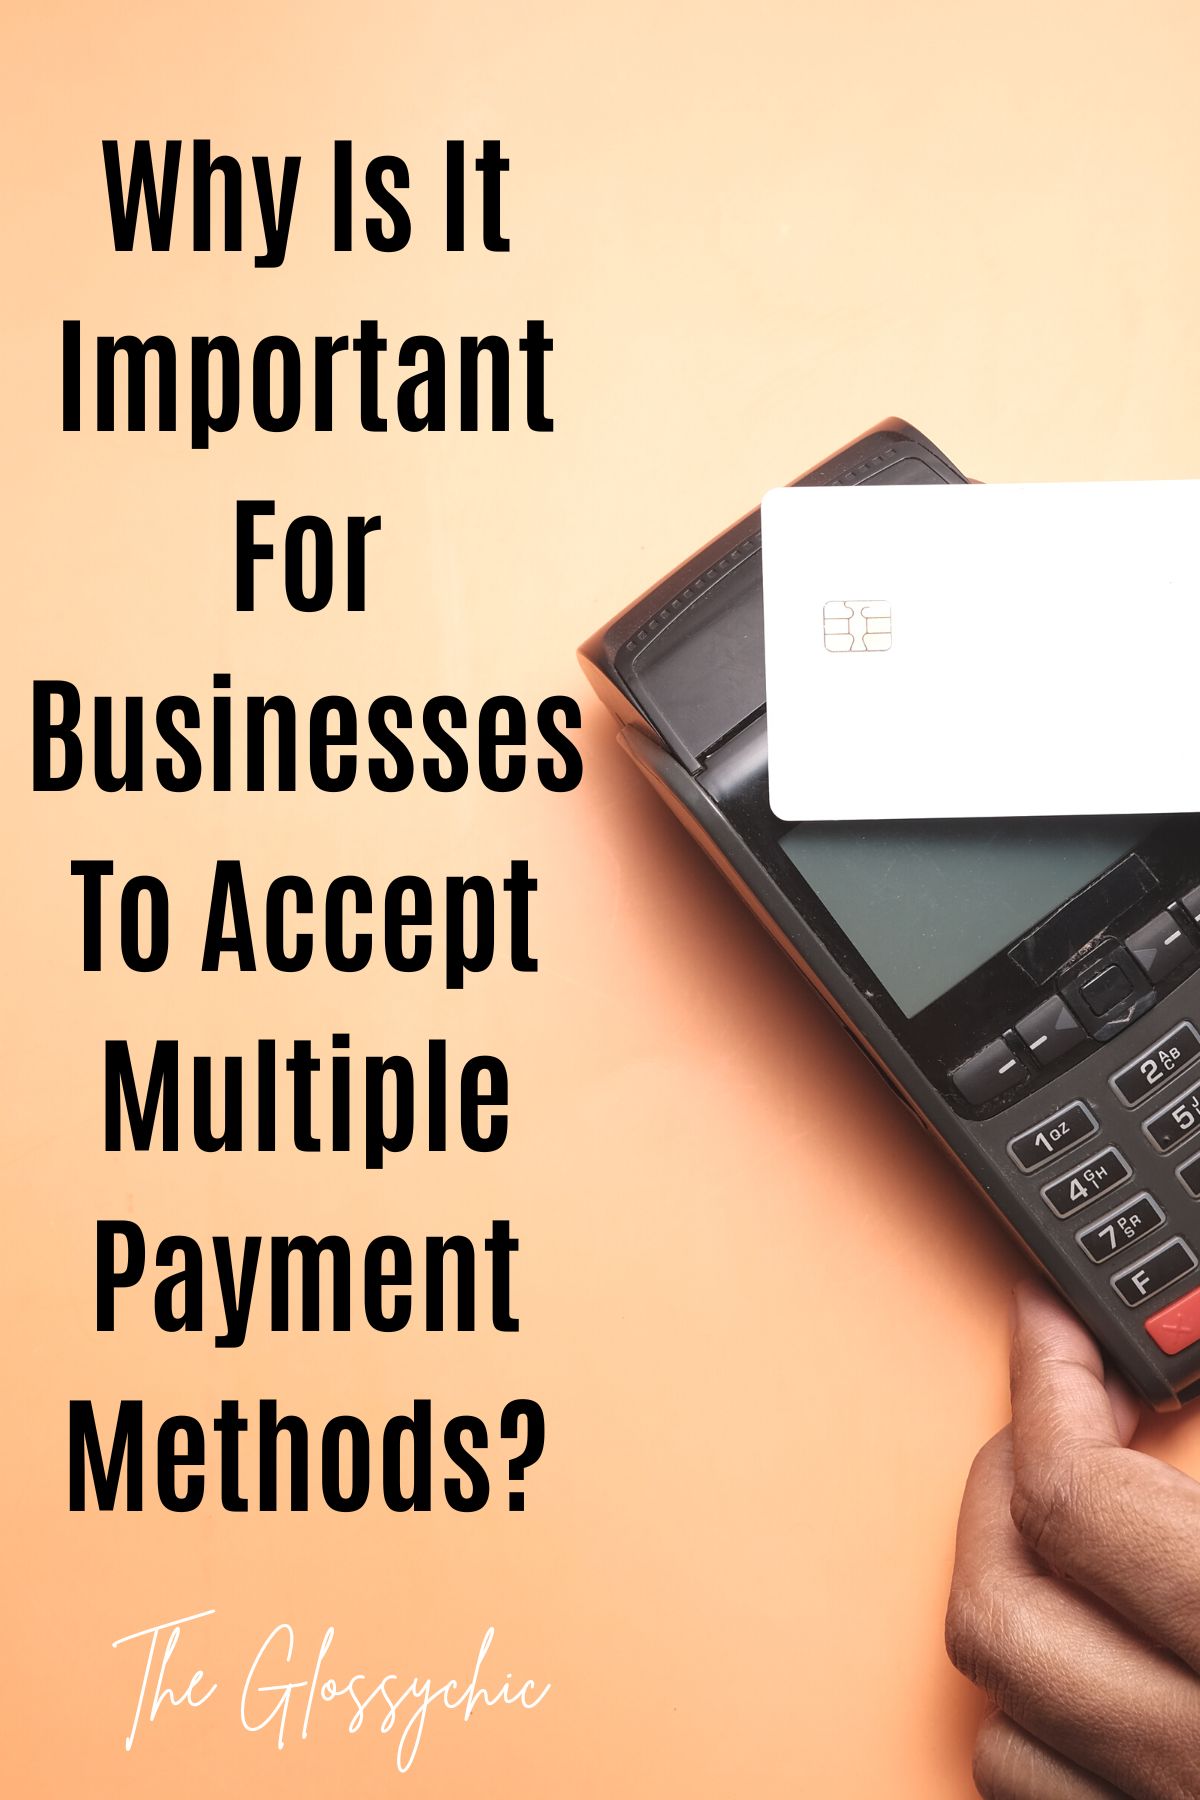 Why Is It Important For Businesses To Accept Multiple Payment Methods?